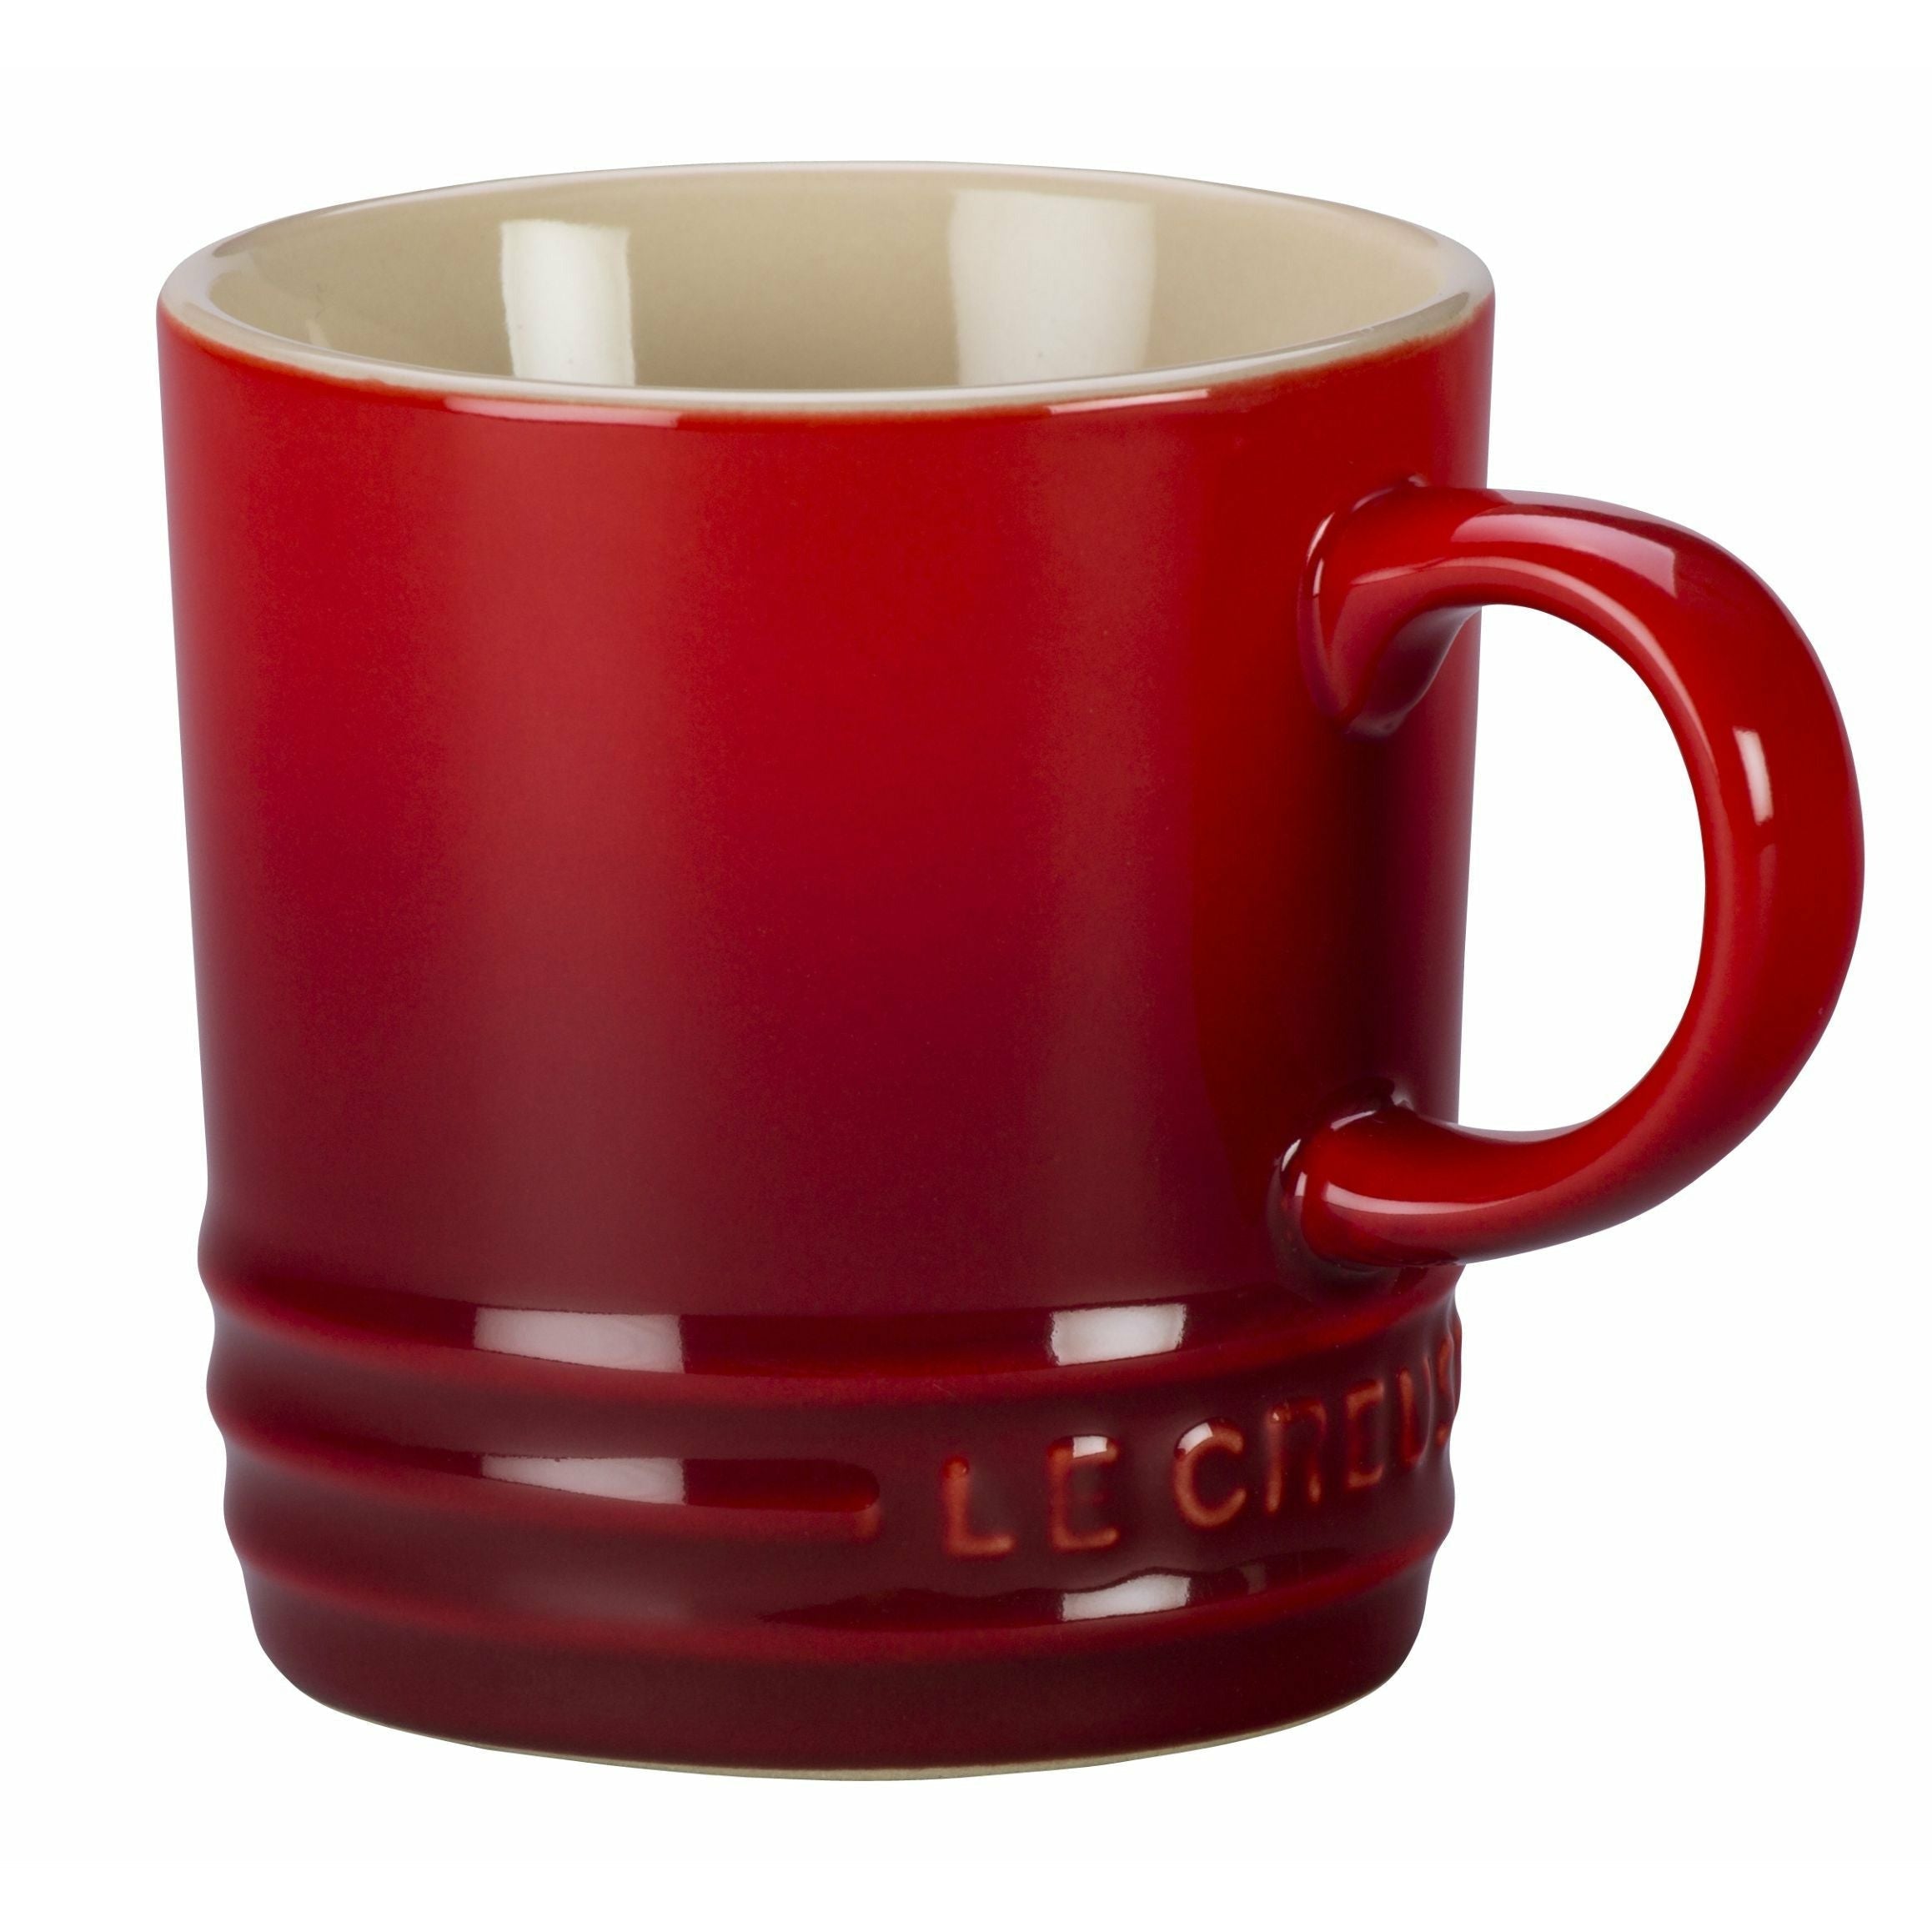 Le Creuset Cappuccino Mub 200 ml, Cherry Red